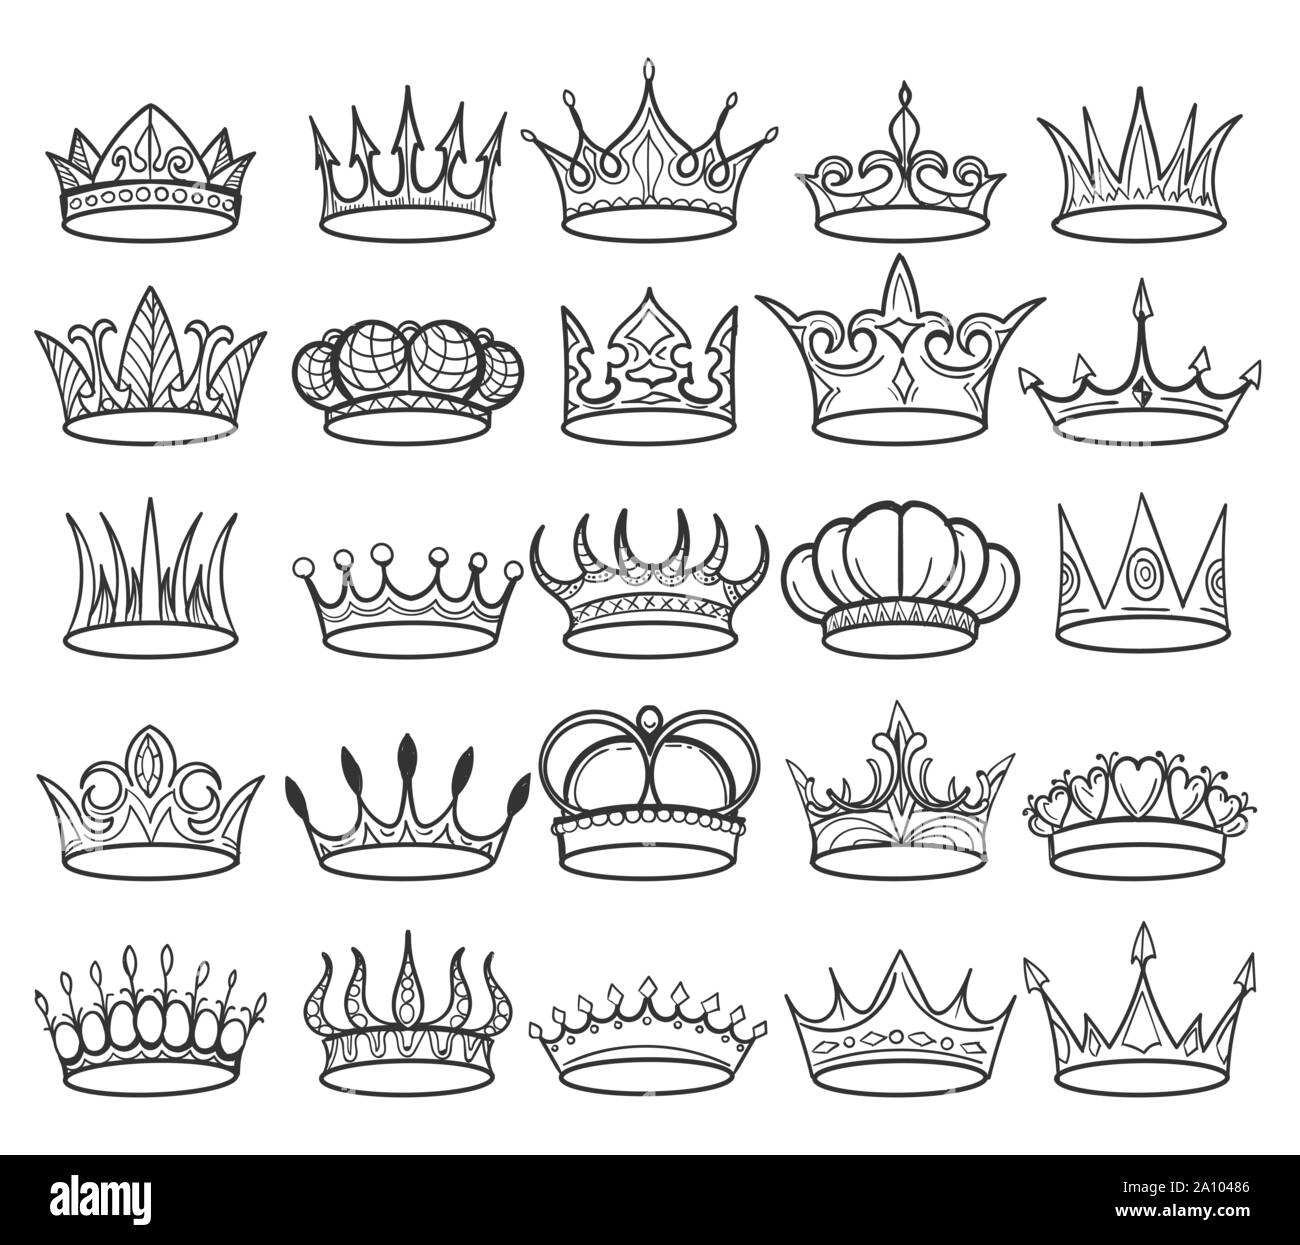 Doodle crowns. Sketch crown of queen or king icons set. Vector illustration. Stock Vector